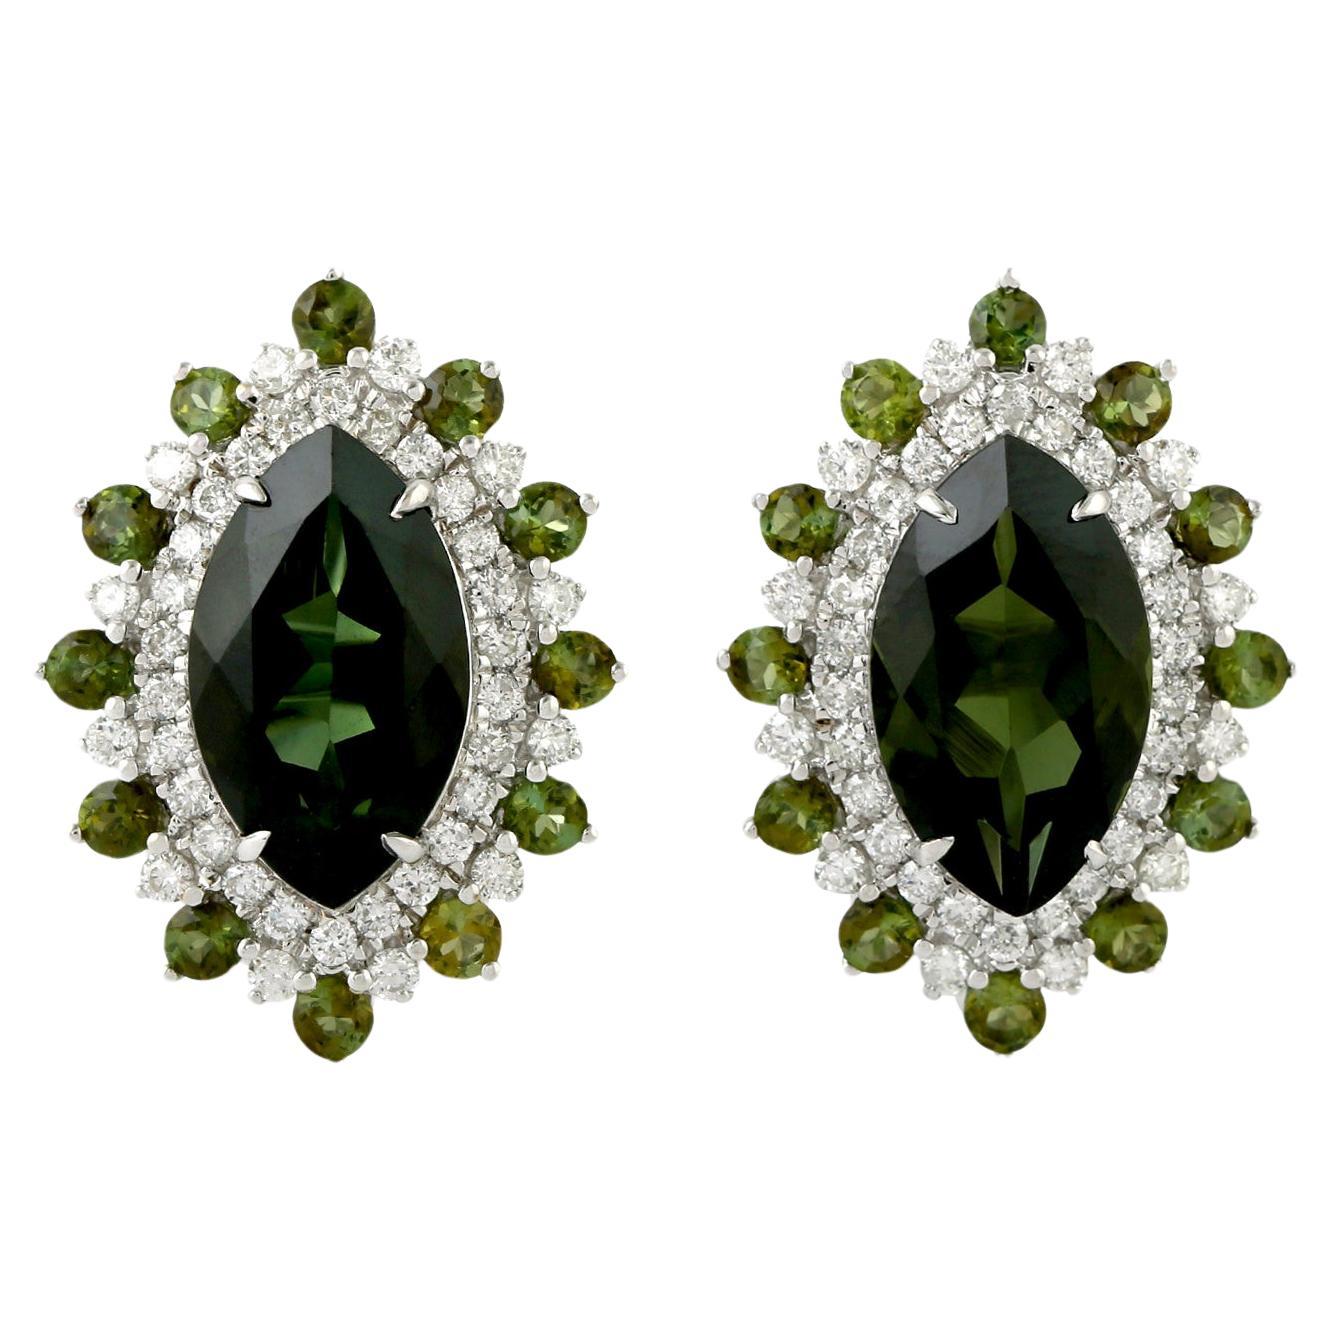 Stunning Natural Green Tourmalines And Diamonds Earrings 18K Gold 6.68 Carats For Sale